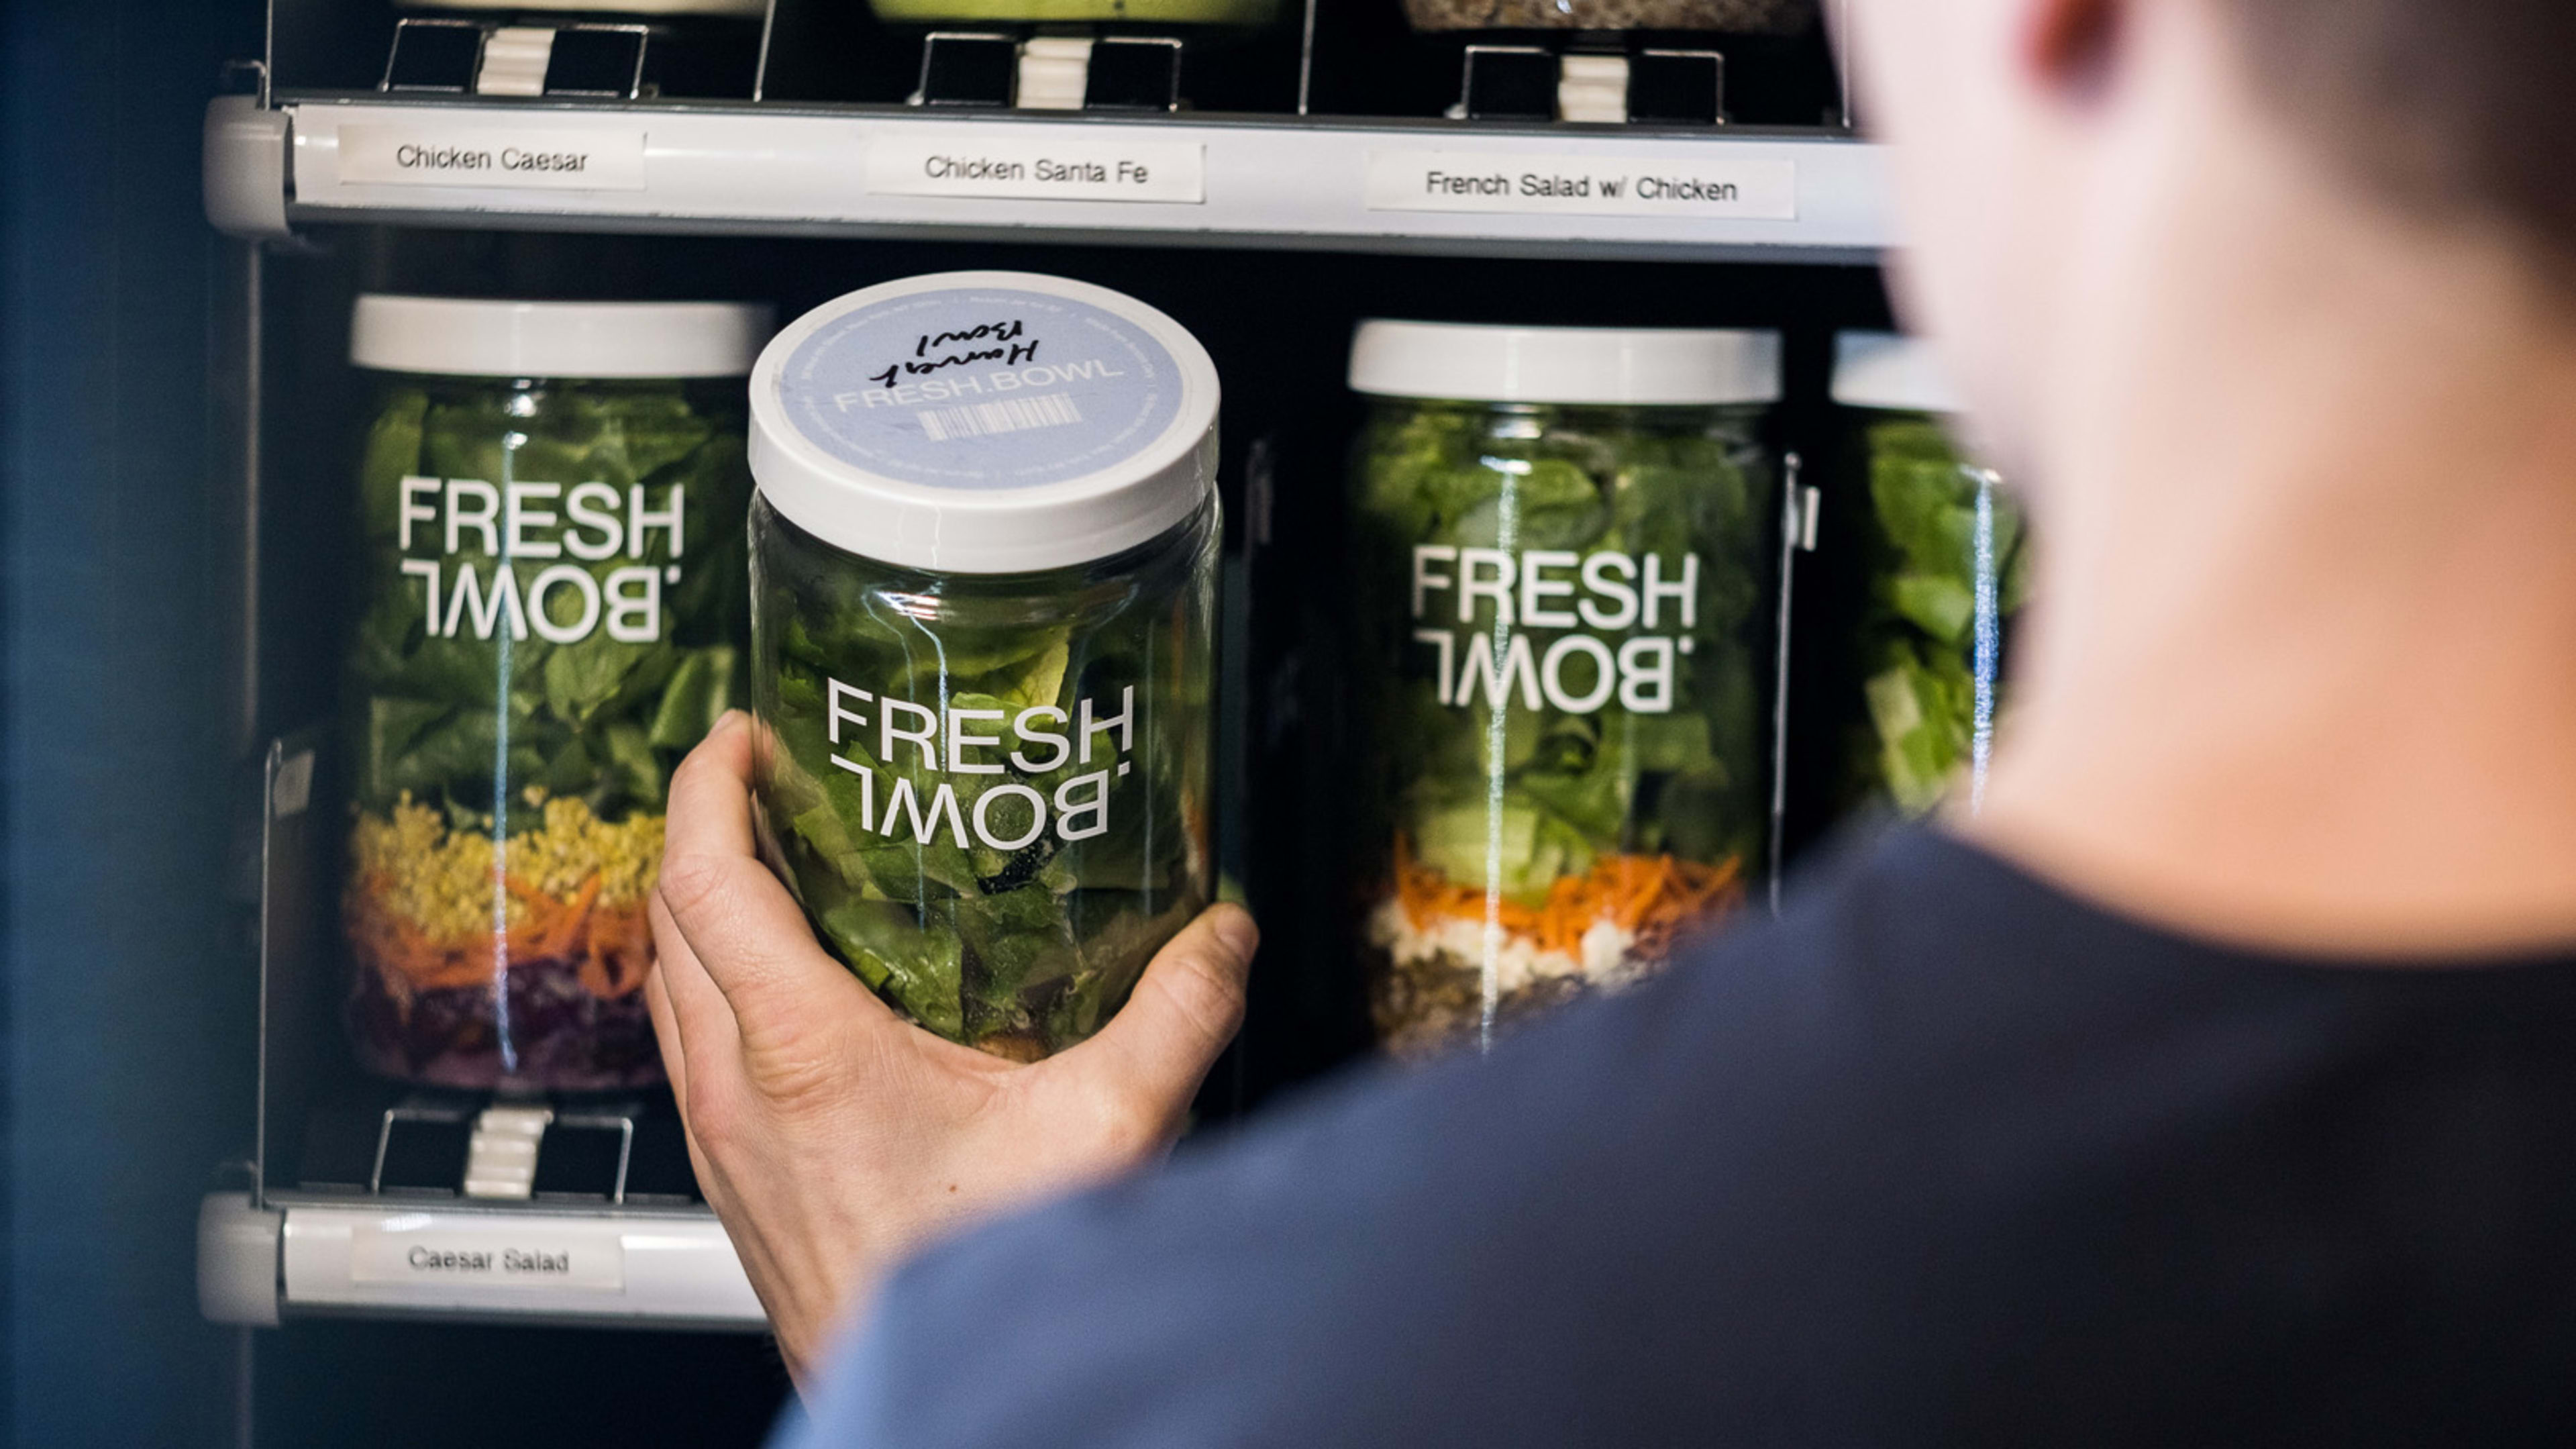 Need a quick salad? These new vending machines have you covered